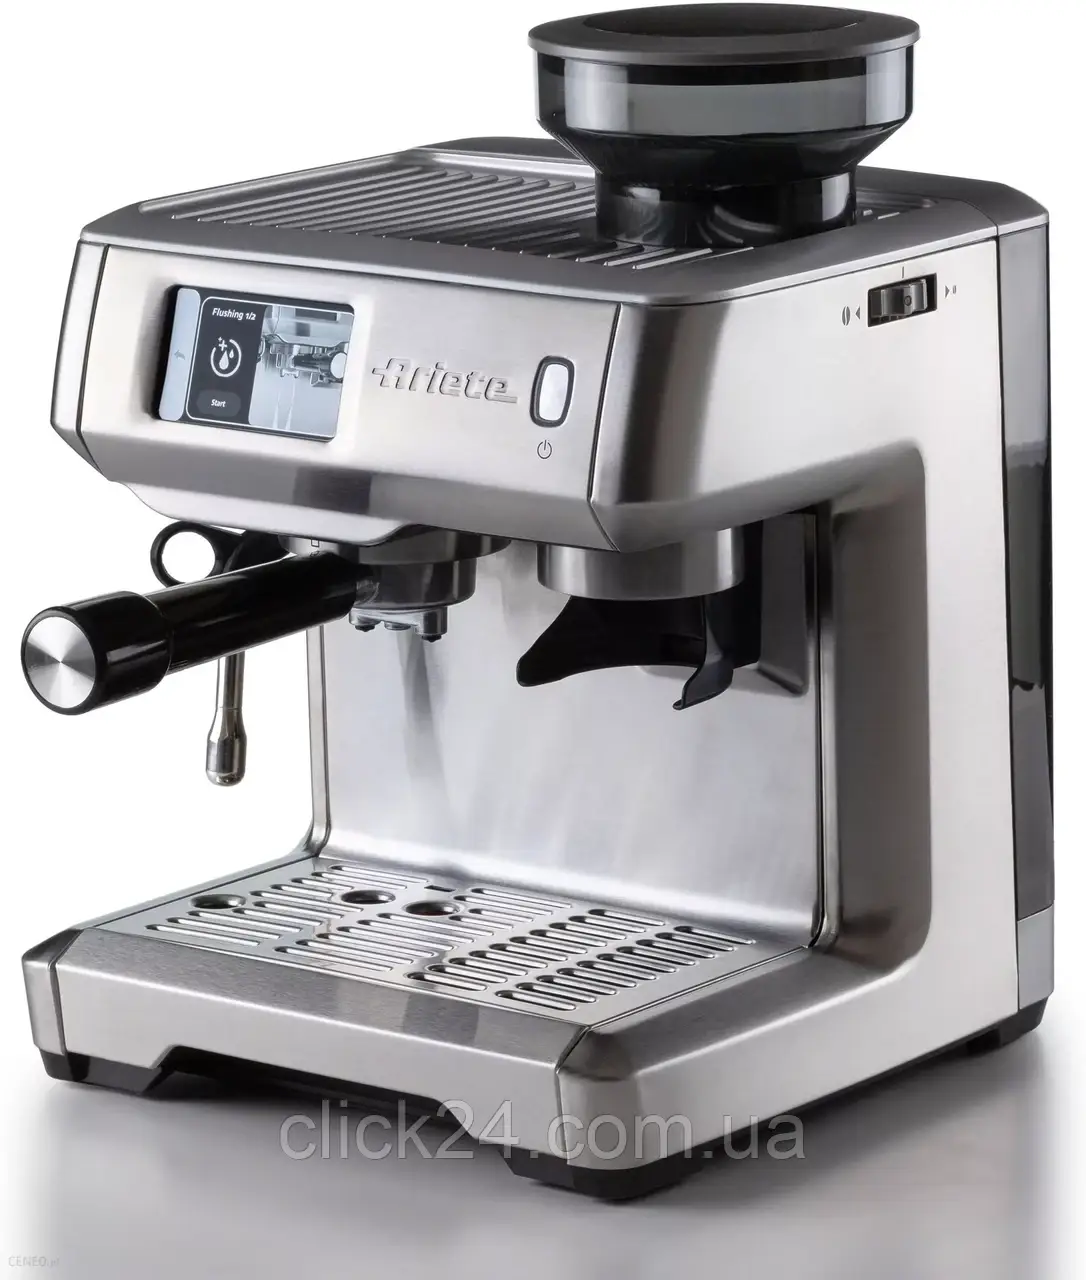 Electrolux Expressionist Thermal Coffeemaker Review, Price and Features